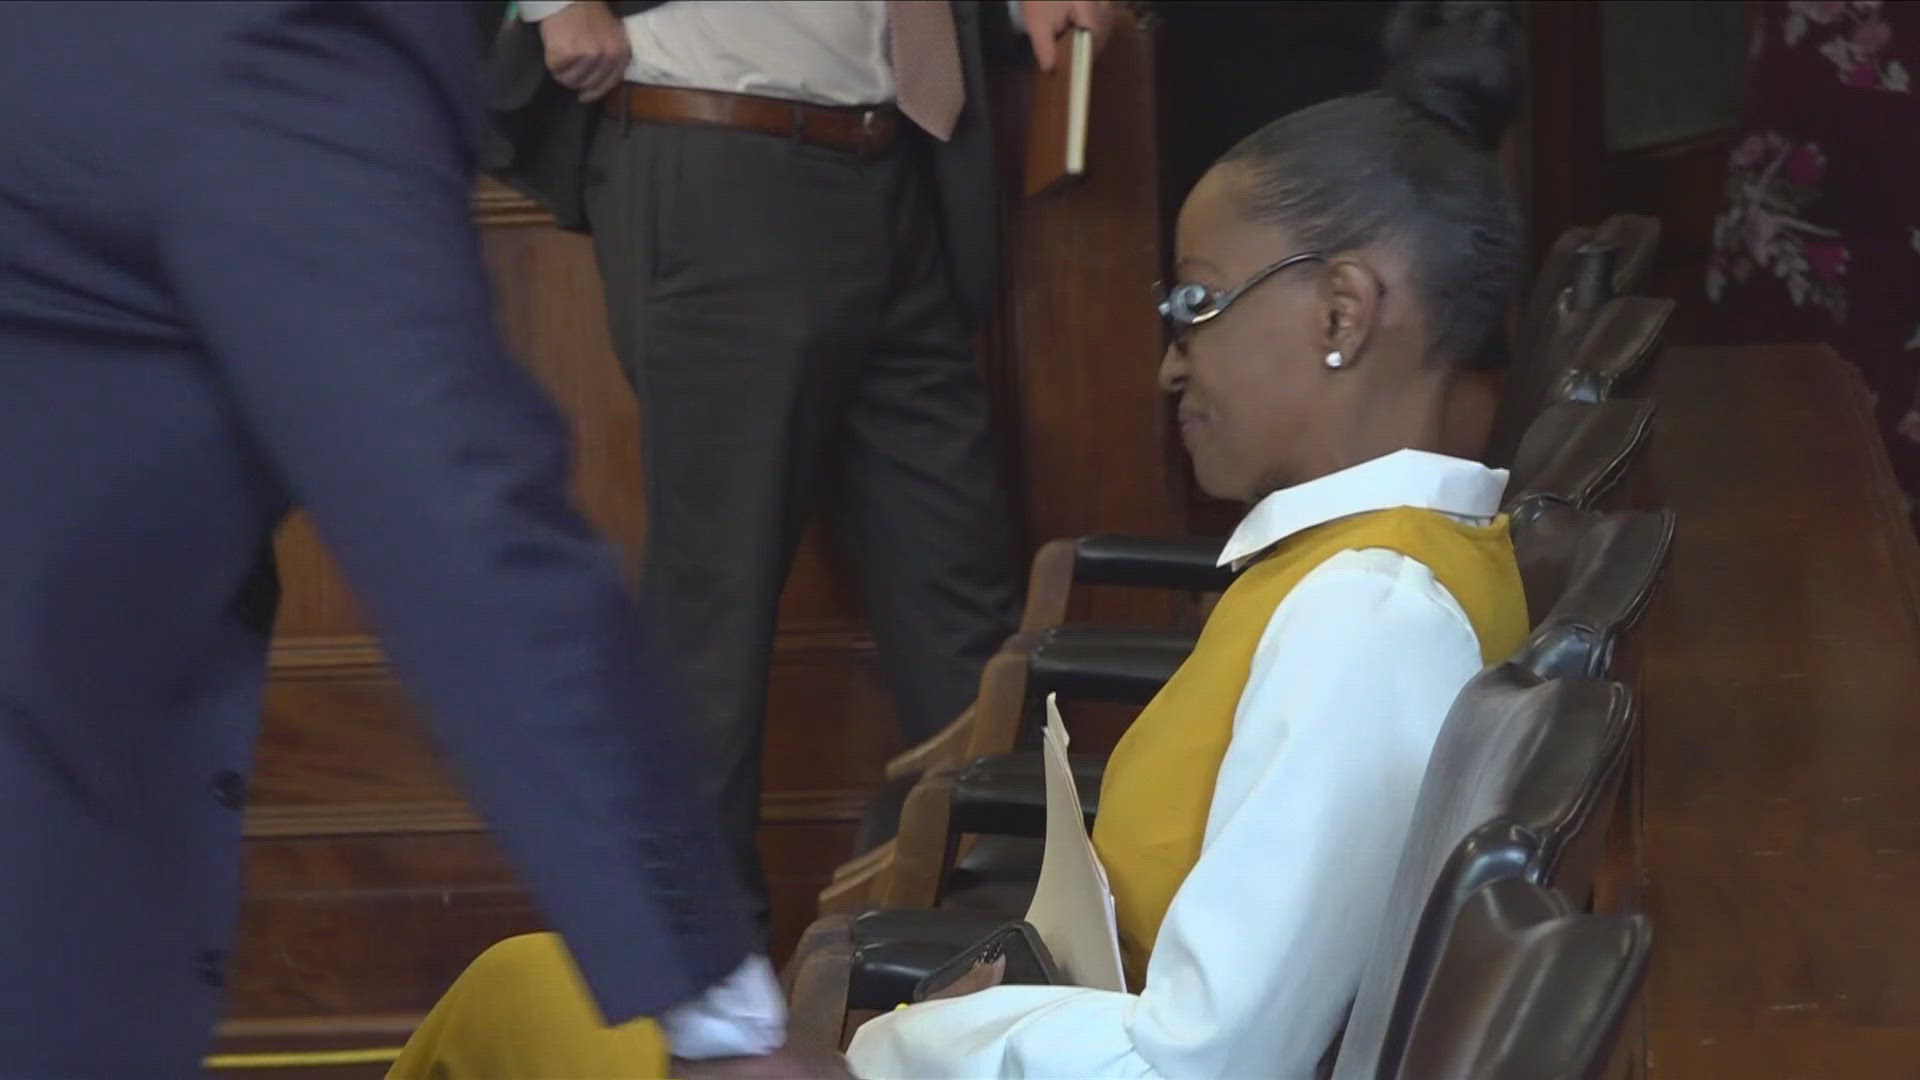 Friday marked Halbert's first appearance in court after the Hamilton County DA filed for her ouster.